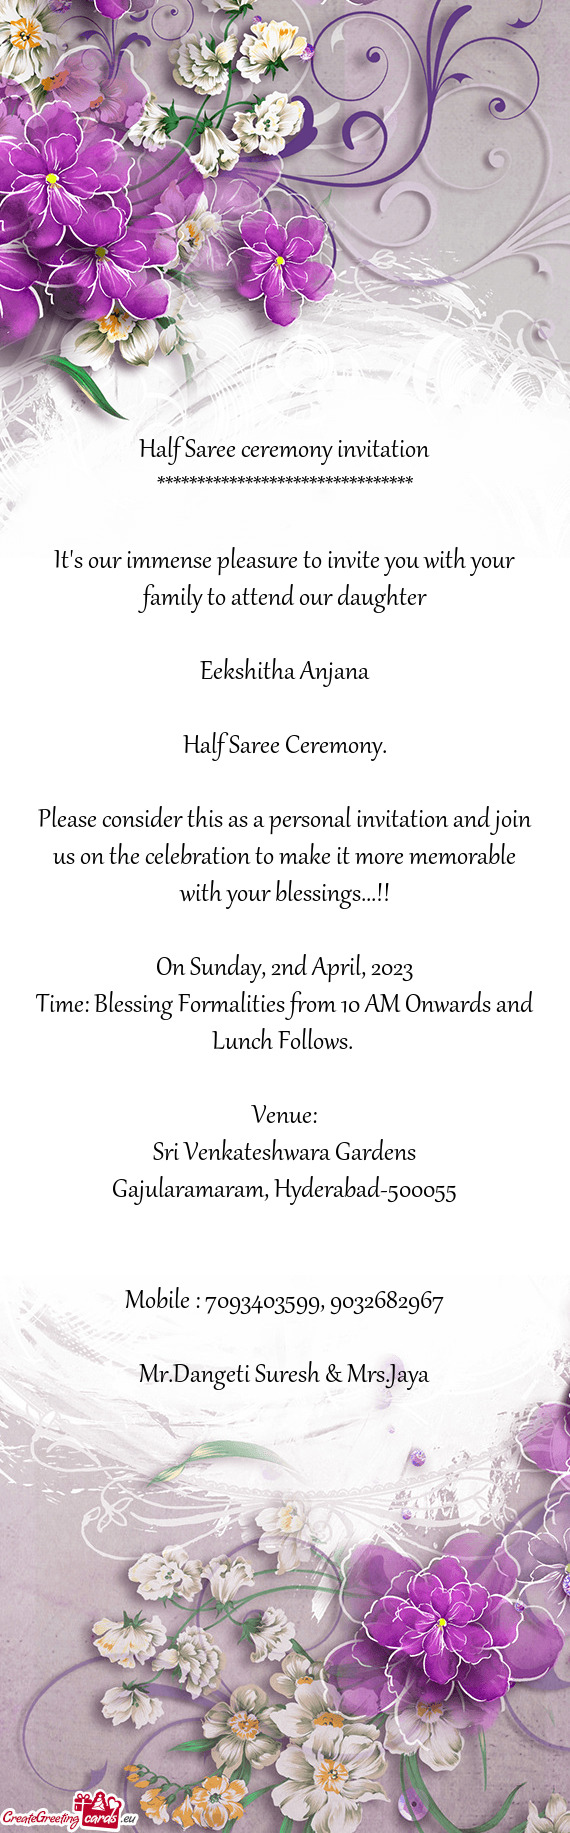 Time: Blessing Formalities from 10 AM Onwards and Lunch Follows